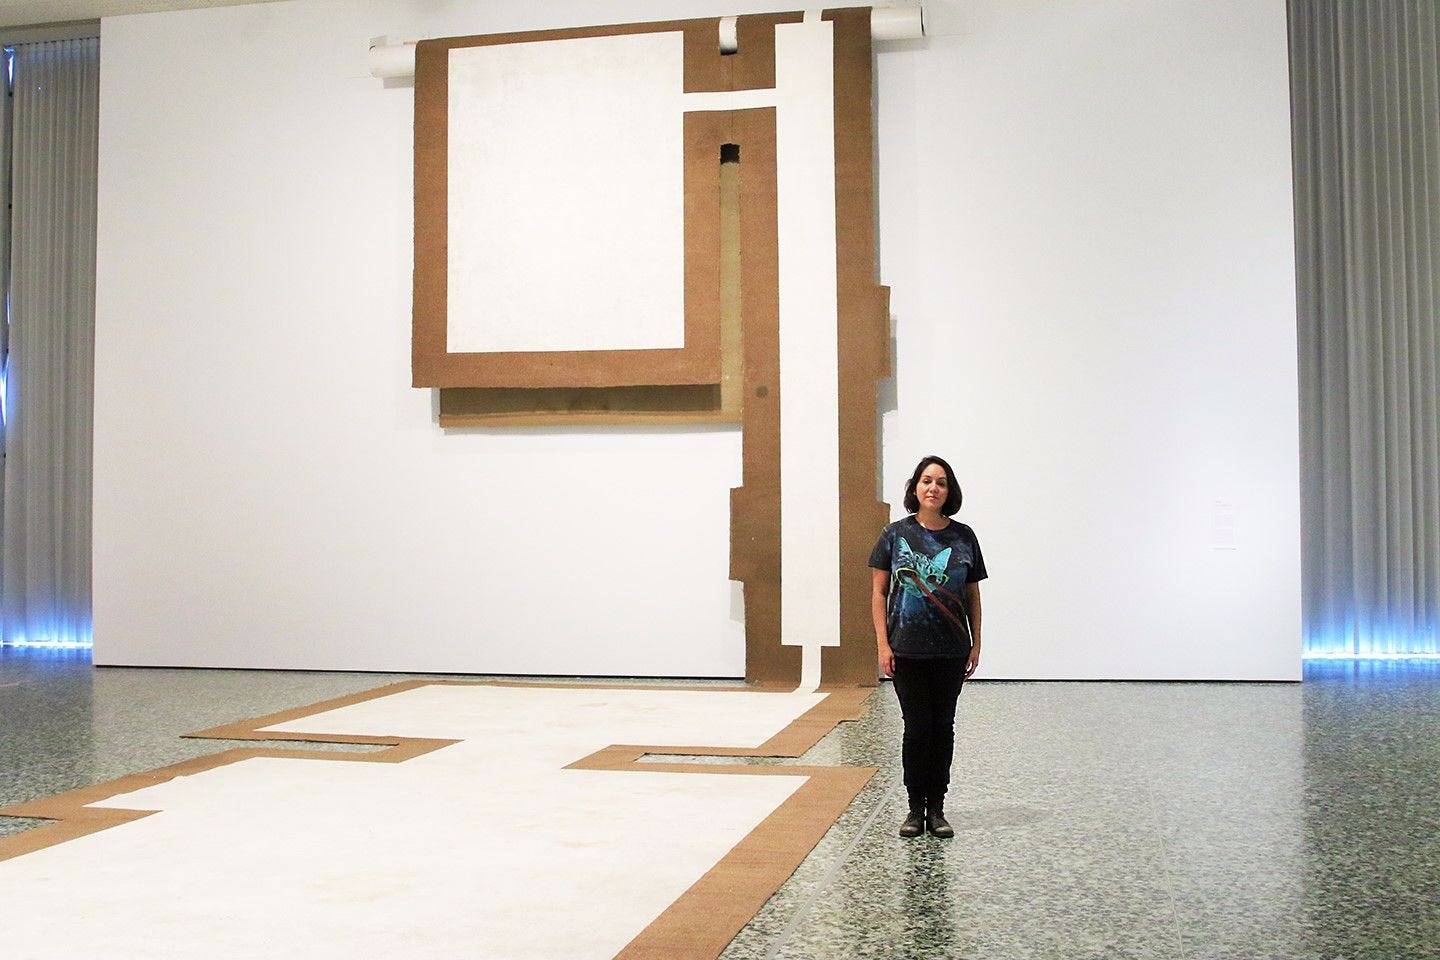 This Artist Brings Her Home into the Museum: Carmen Argote & “720 Sq. Ft.”  | Inside the MFAH | The Museum of Fine Arts, Houston